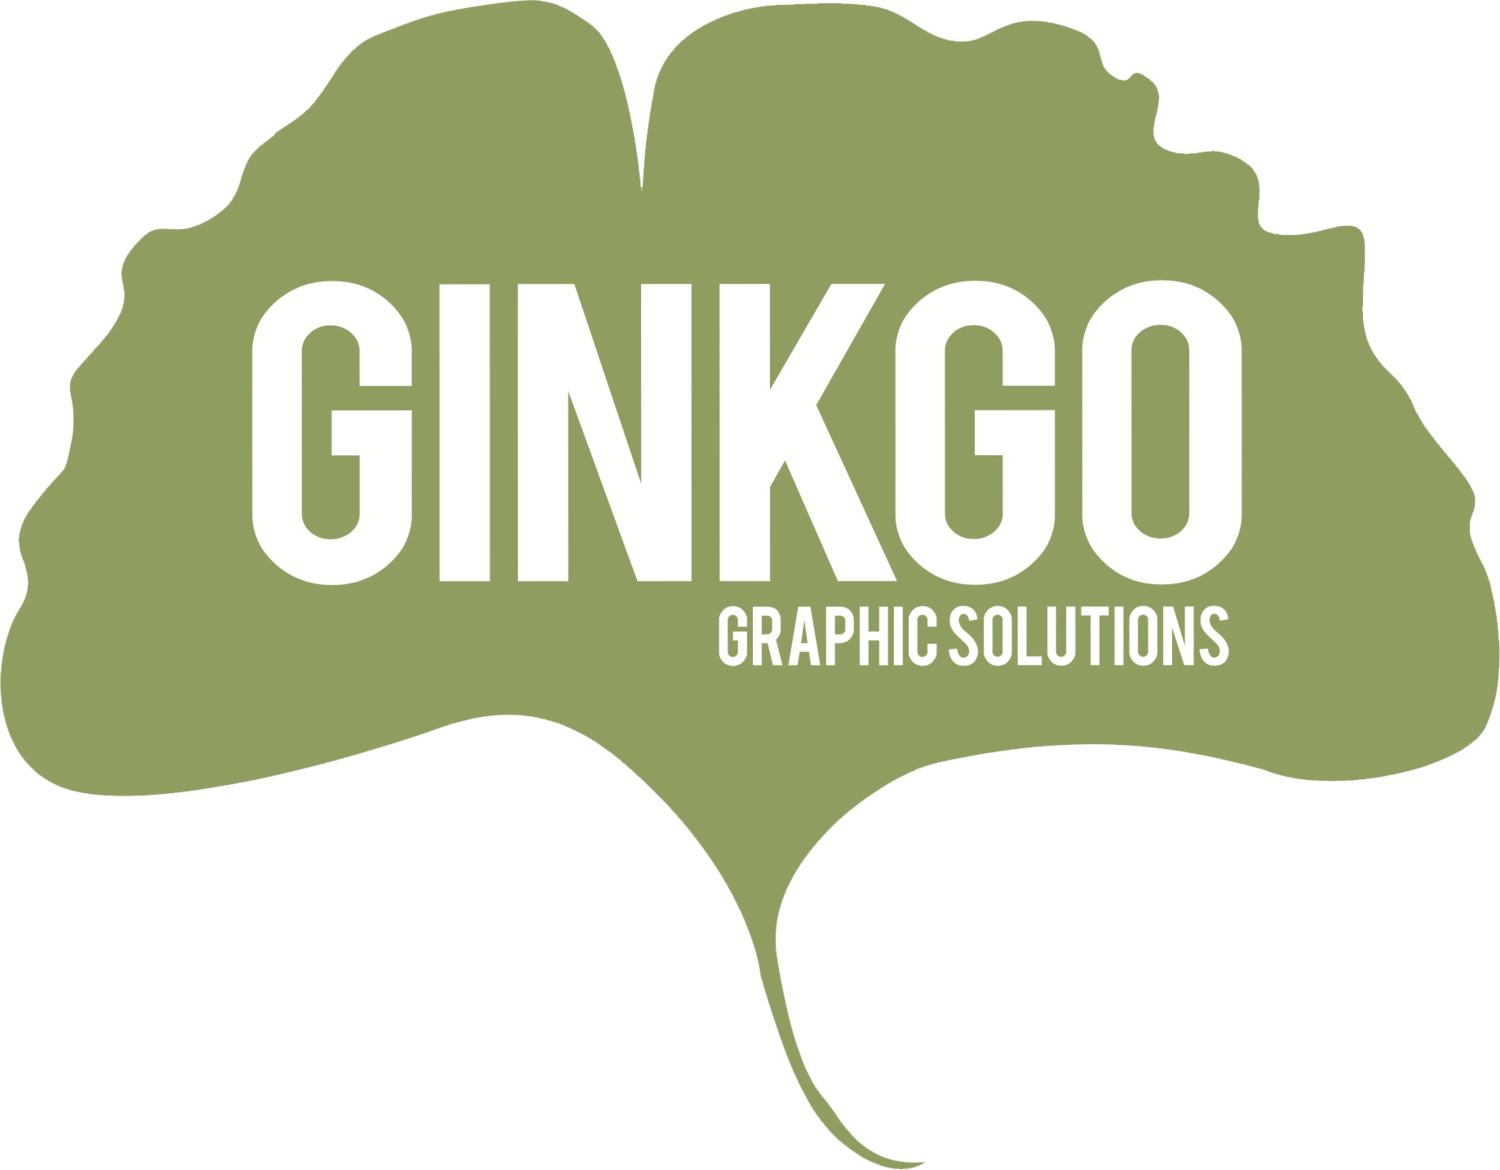  Ginkgo Graphic Solutions